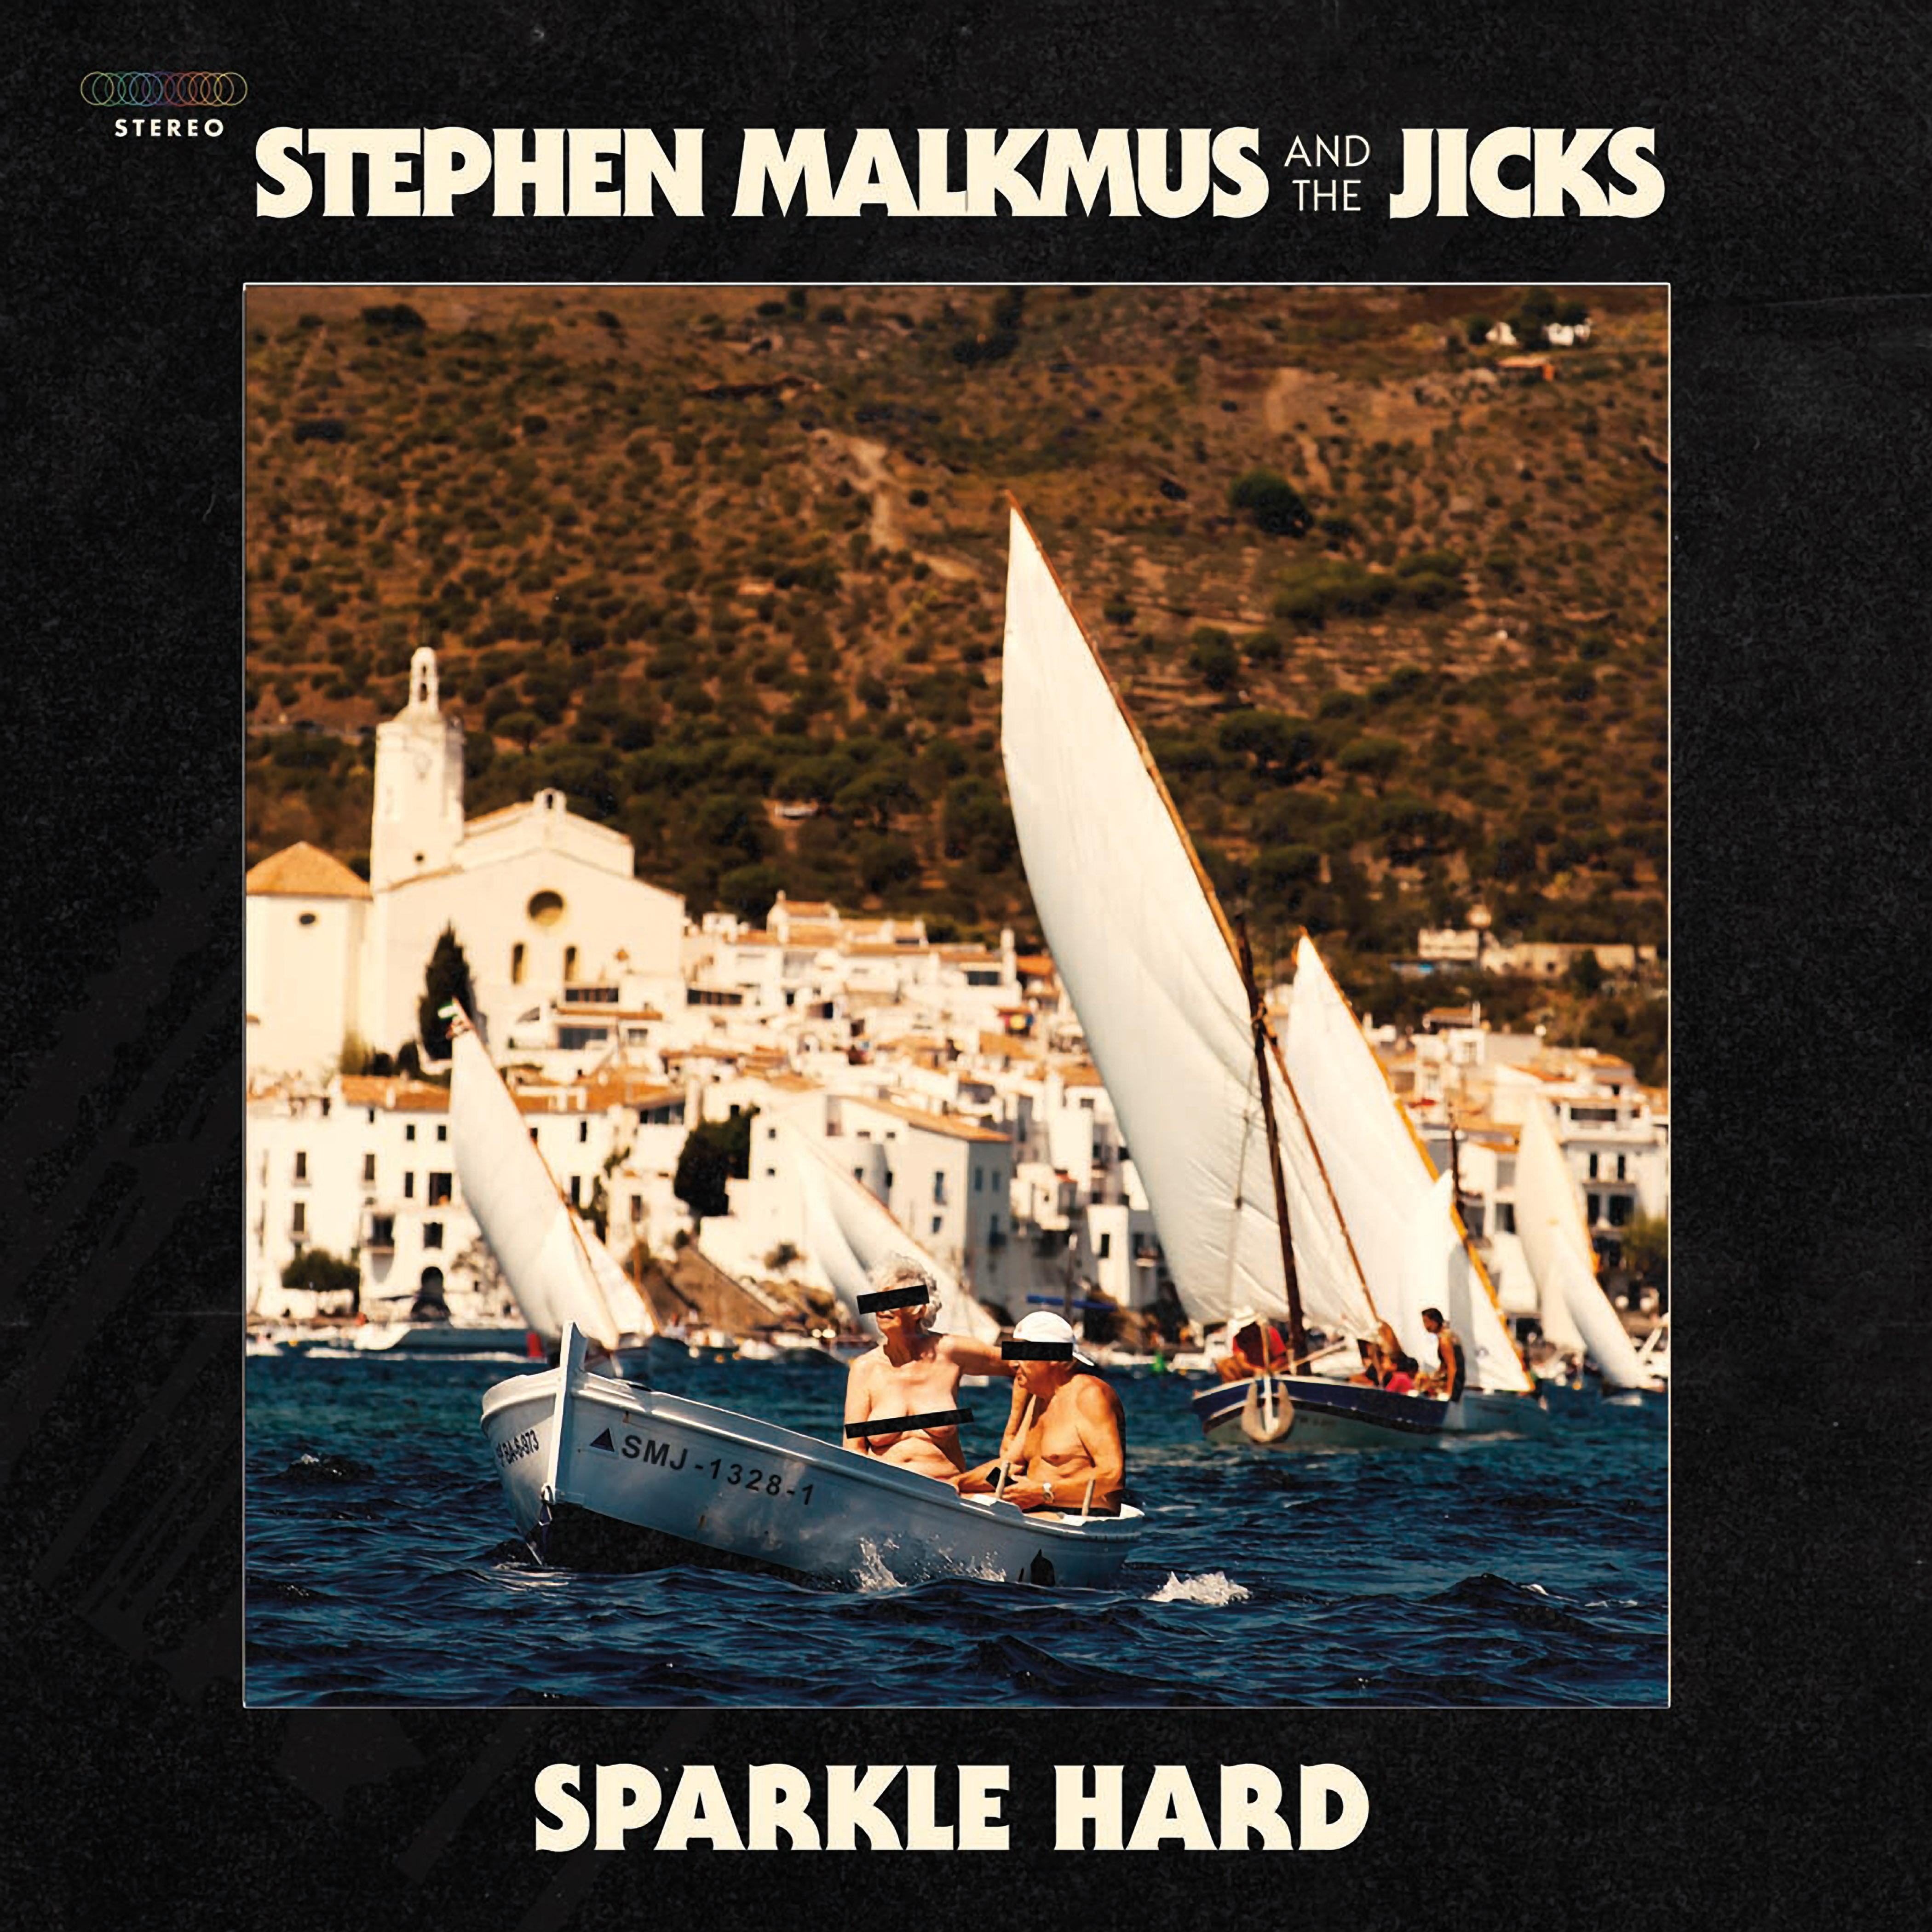 Stephen Malkmus and the Jicks Announce New Album <i>Sparkle Hard</i>, Release “Shiggy”” title=”11183_JKT” data-original-id=”283384″ data-adjusted-id=”283384″ class=”sm_size_full_width sm_alignment_center ” data-image-source=”professional” />
<p>1. Cast Off<br />
2. Future Suite<br />
3. Solid Silk<br />
4. Bike Lane<br />
5. Middle America<br />
6. Rattler<br />
7. Shiggy<br />
8. Kite<br />
9. Brethren<br />
10. Refute (ft. Kim Gordon)<br />
11. Difficulties / Let Them Eat Vowels</p><div class=